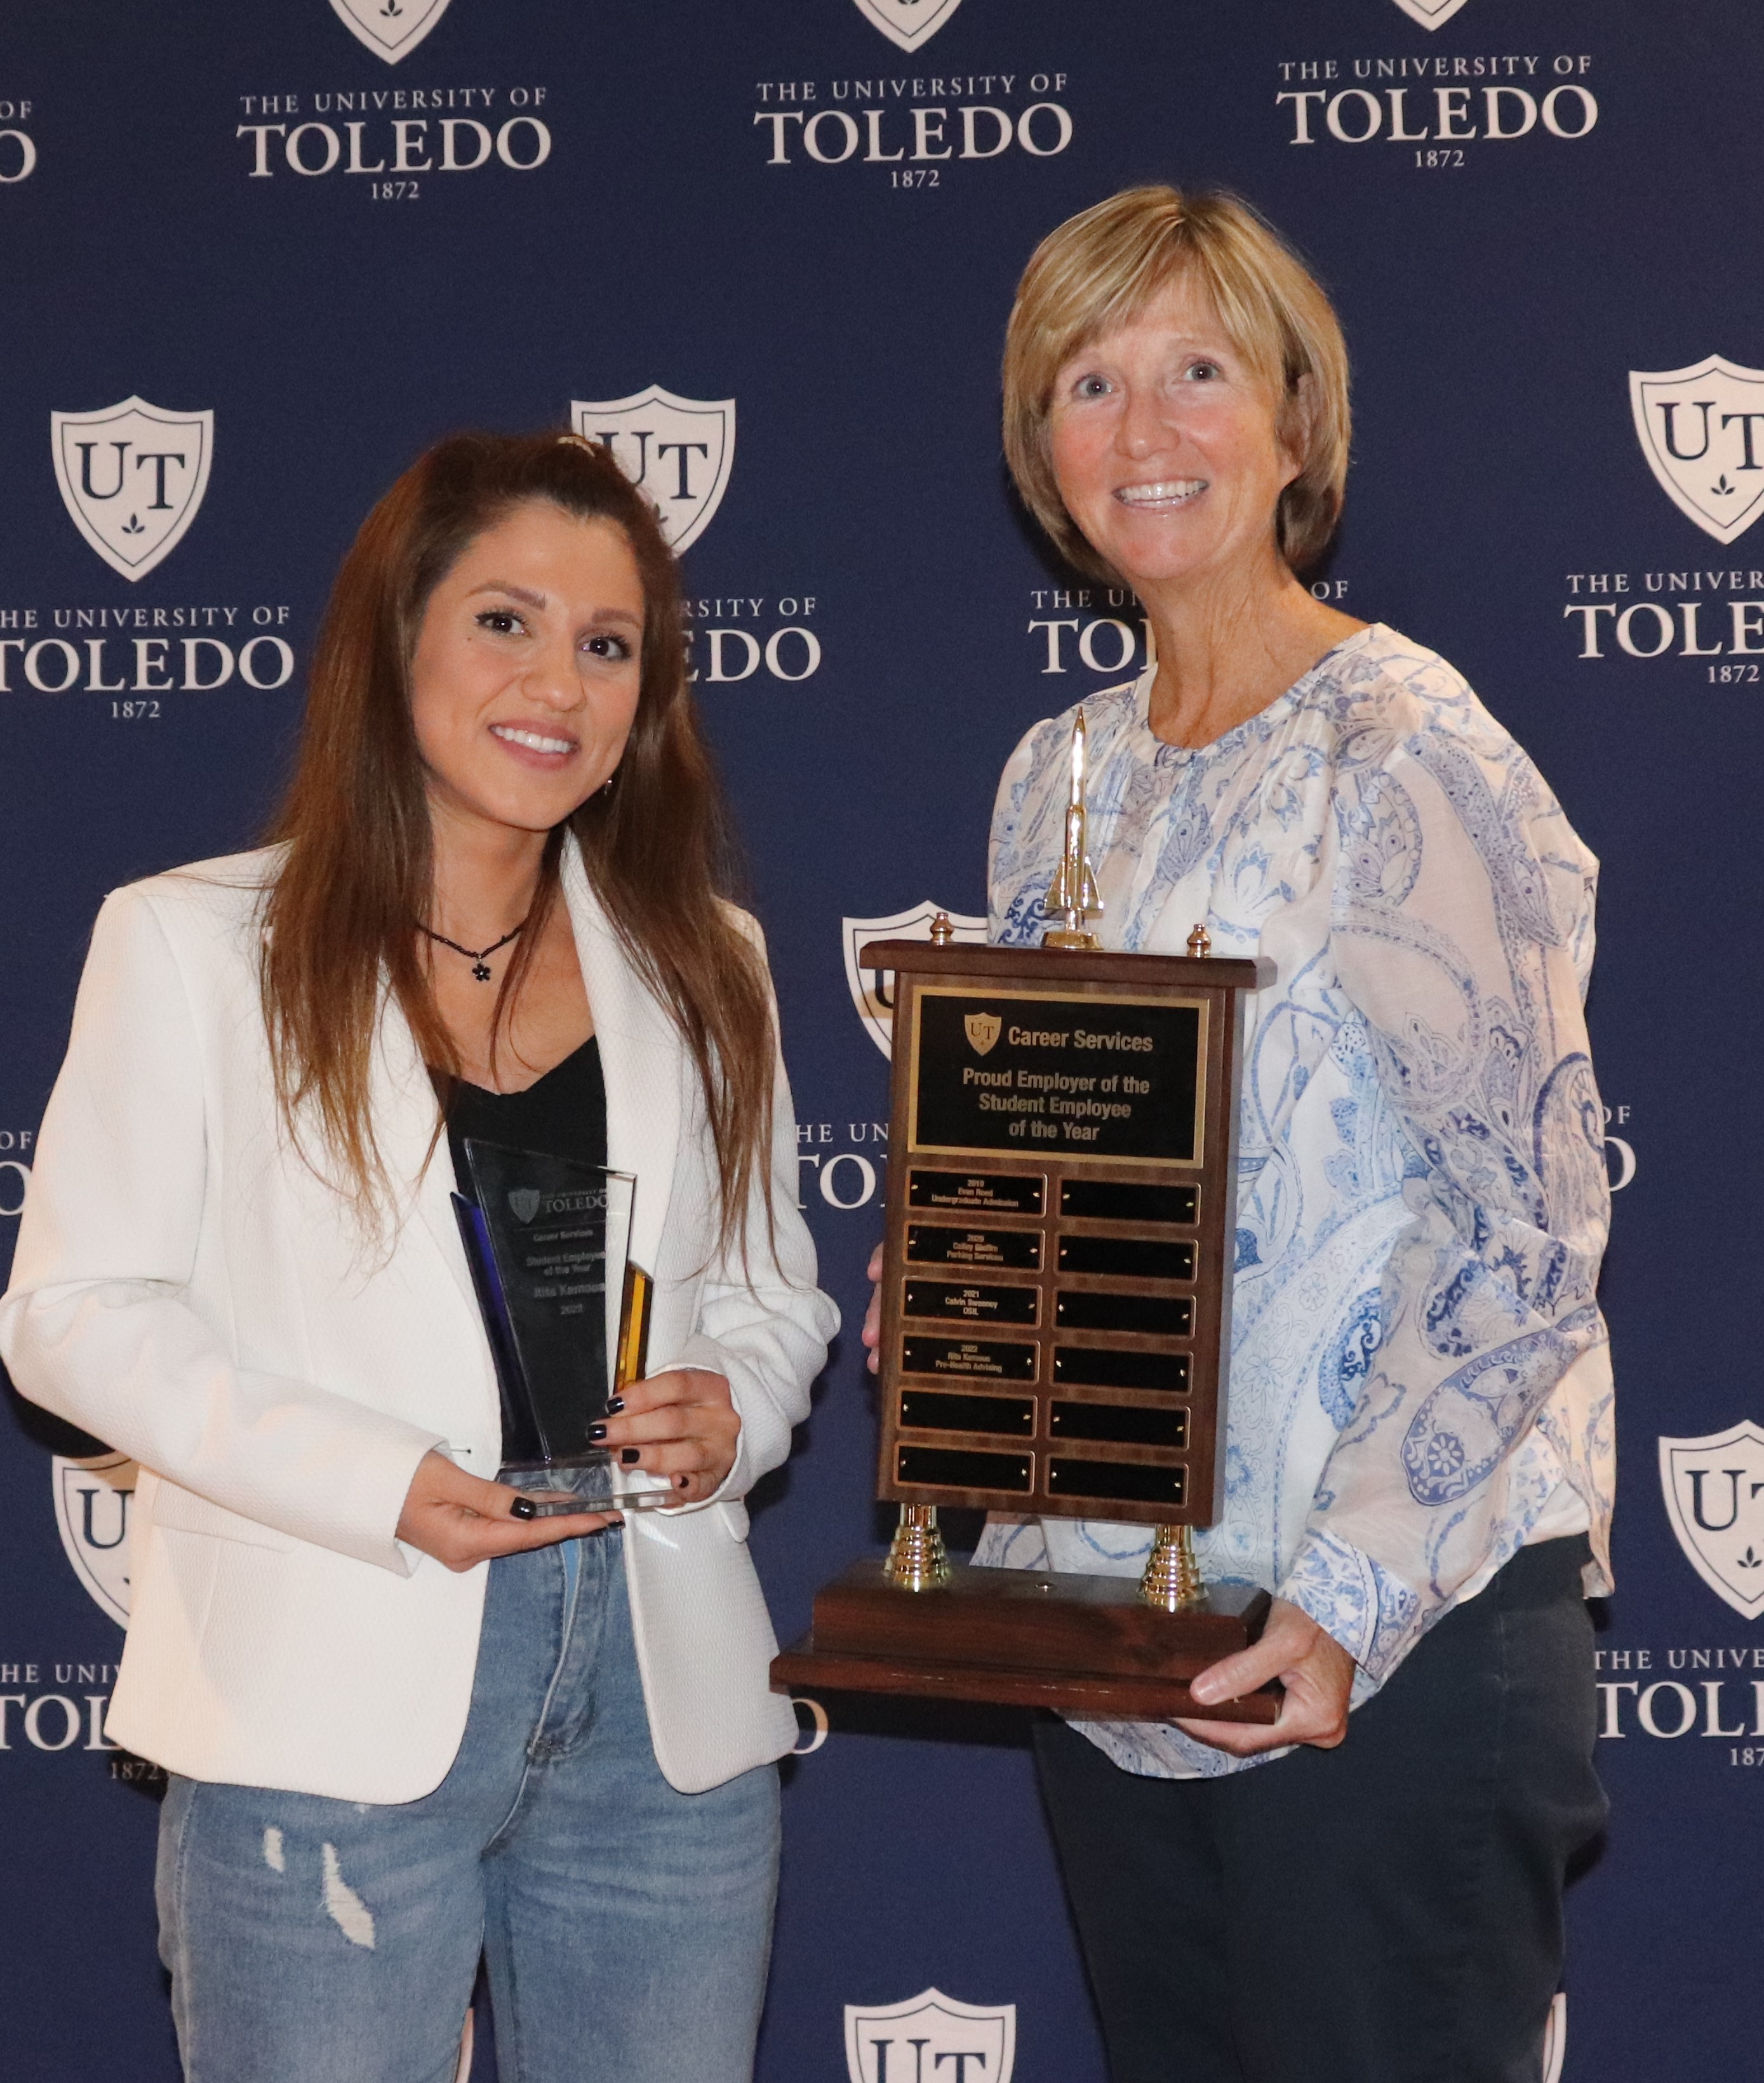 Student employee of the year - Rita Kamoua and her supervisor